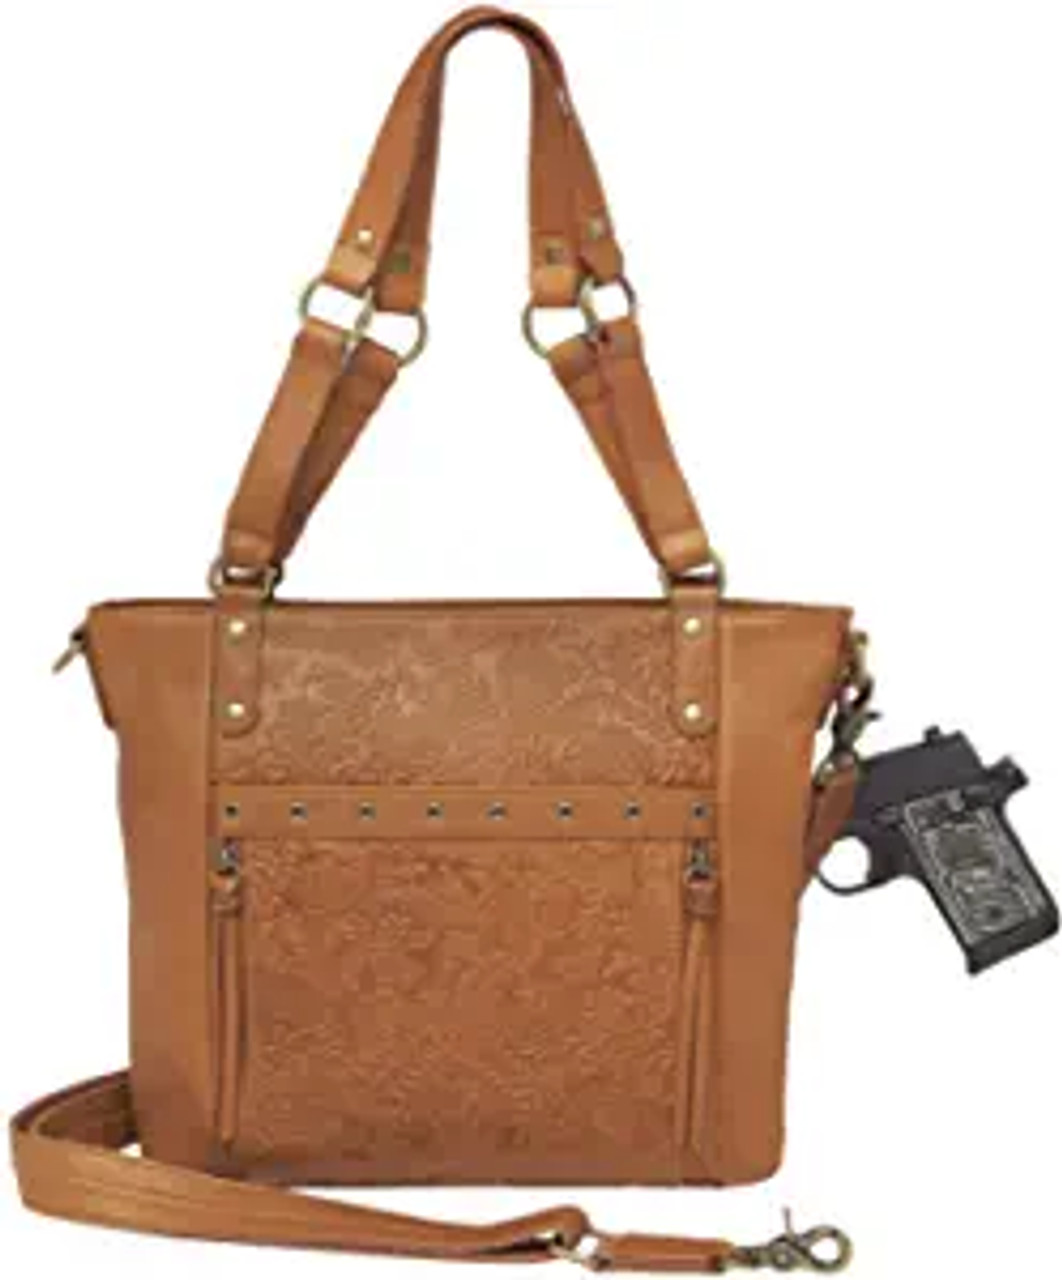 Gun Tote'n Mamas Concealed Carry Raven Cross-Body Bag  $1.00 Off 4.5 Star  Rating w/ Free Shipping and Handling